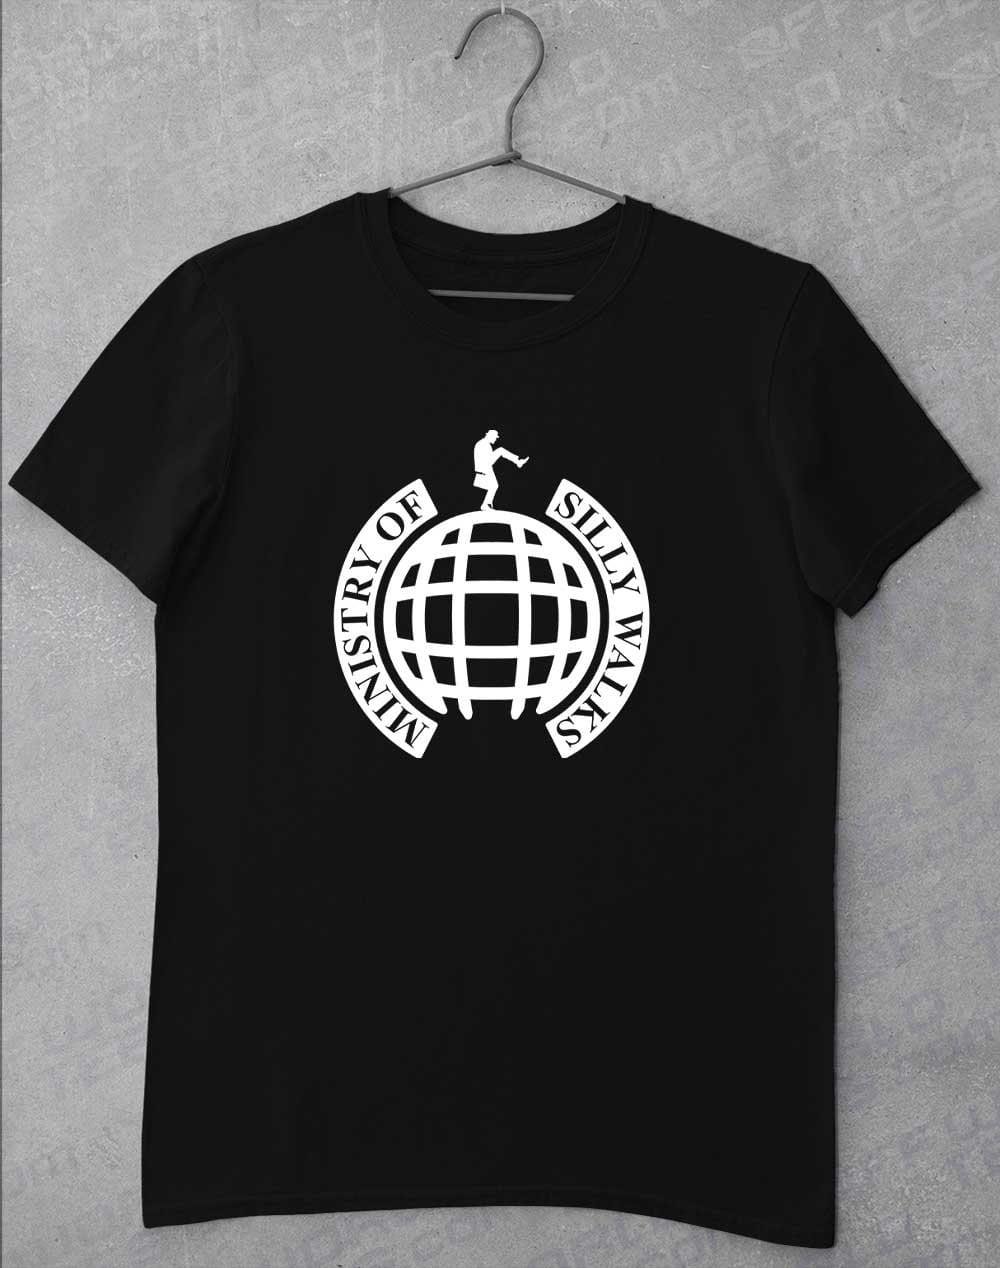 Ministry of Silly Walks T-Shirt S / Black  - Off World Tees